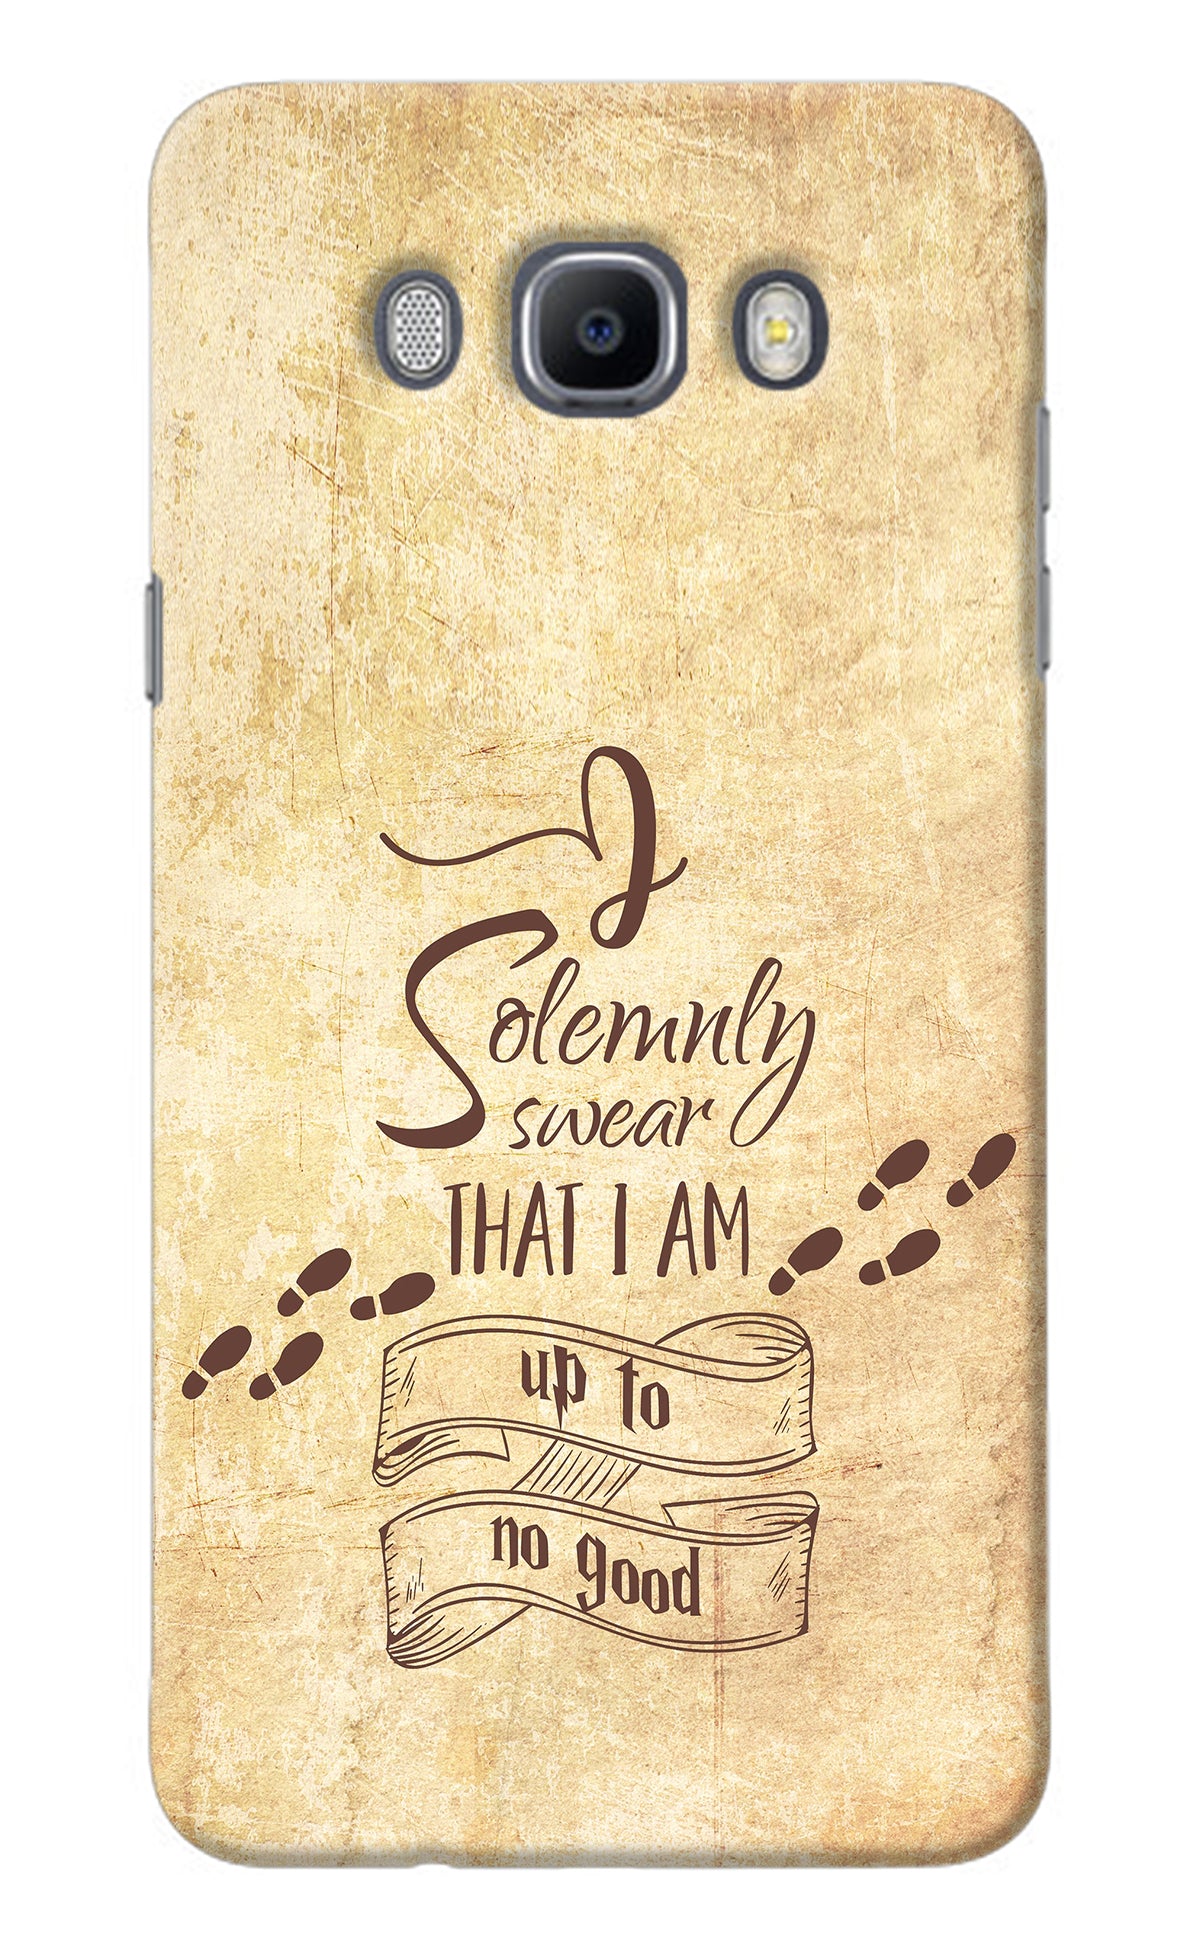 I Solemnly swear that i up to no good Samsung J7 2016 Back Cover